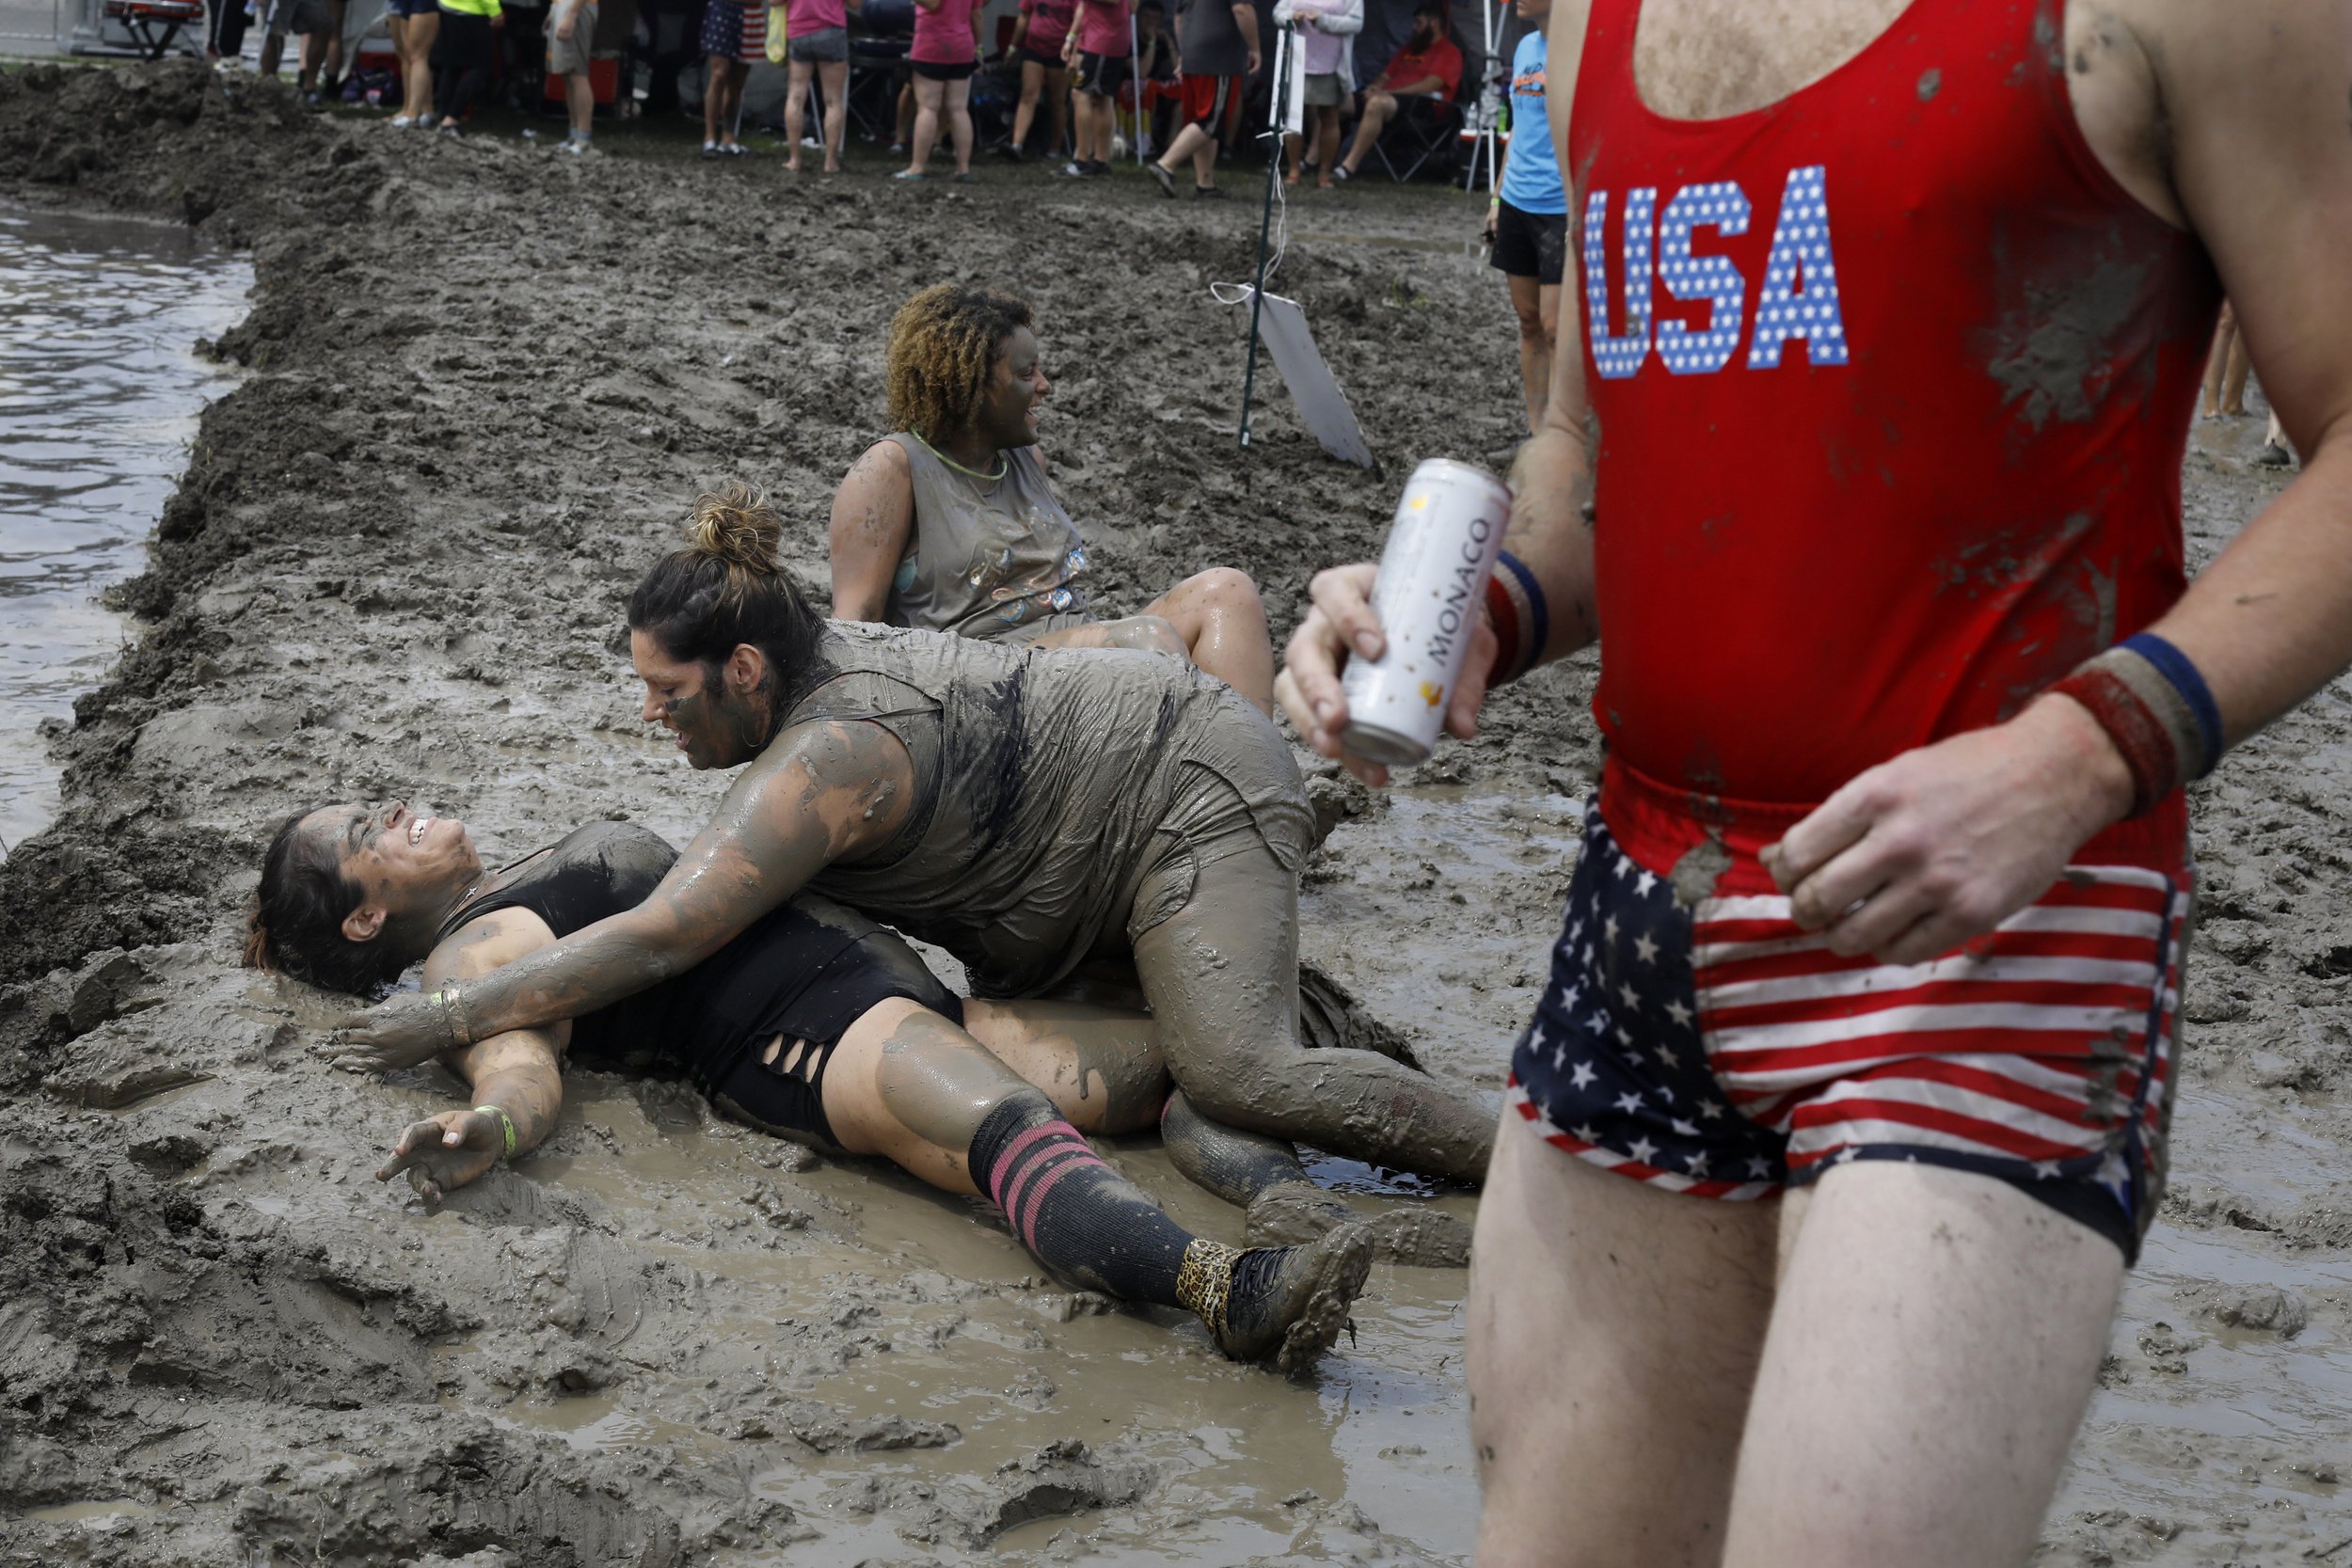  Jessica Black, center, slips as she tries to help a teammate up as they climb out of the submerged volleyball court in the seventh annual Mud Volleyball Tournament at the Lucas County Fairgrounds in Maumee, Ohio, on Aug. 25, 2018. The event was orga